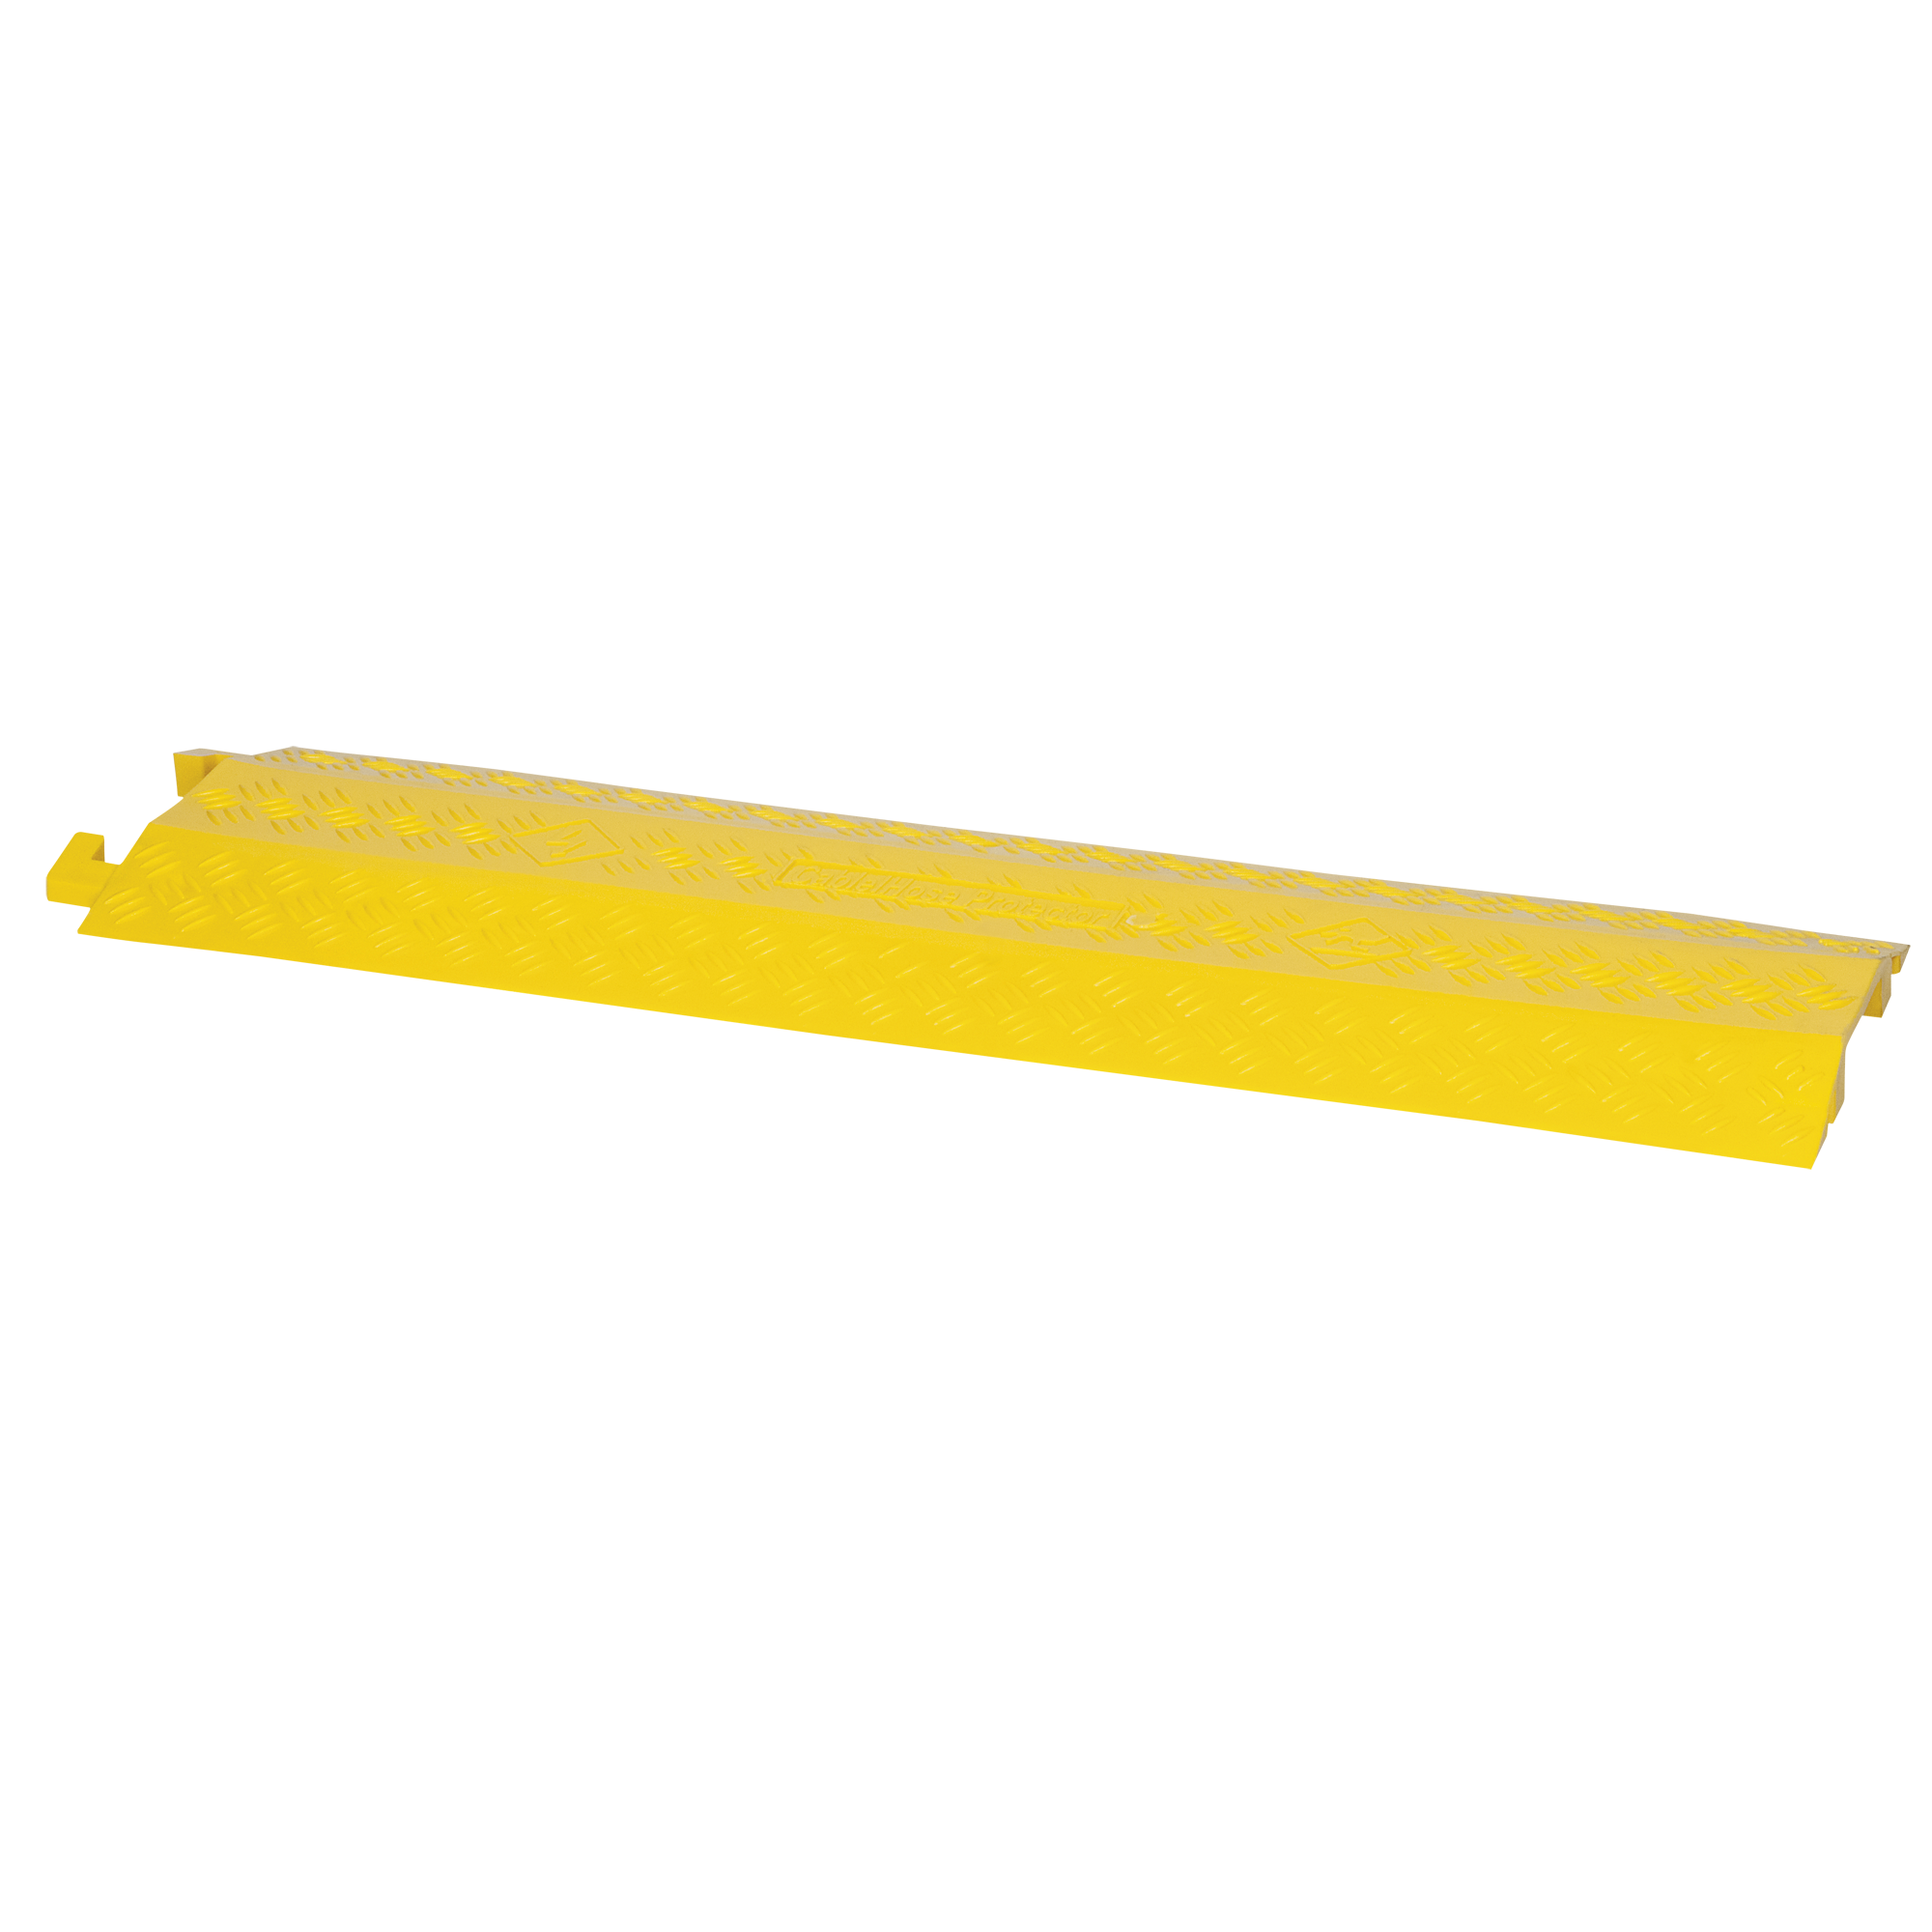 Showgear Cable Cover 4 With 1 Channel, Yellow ABS